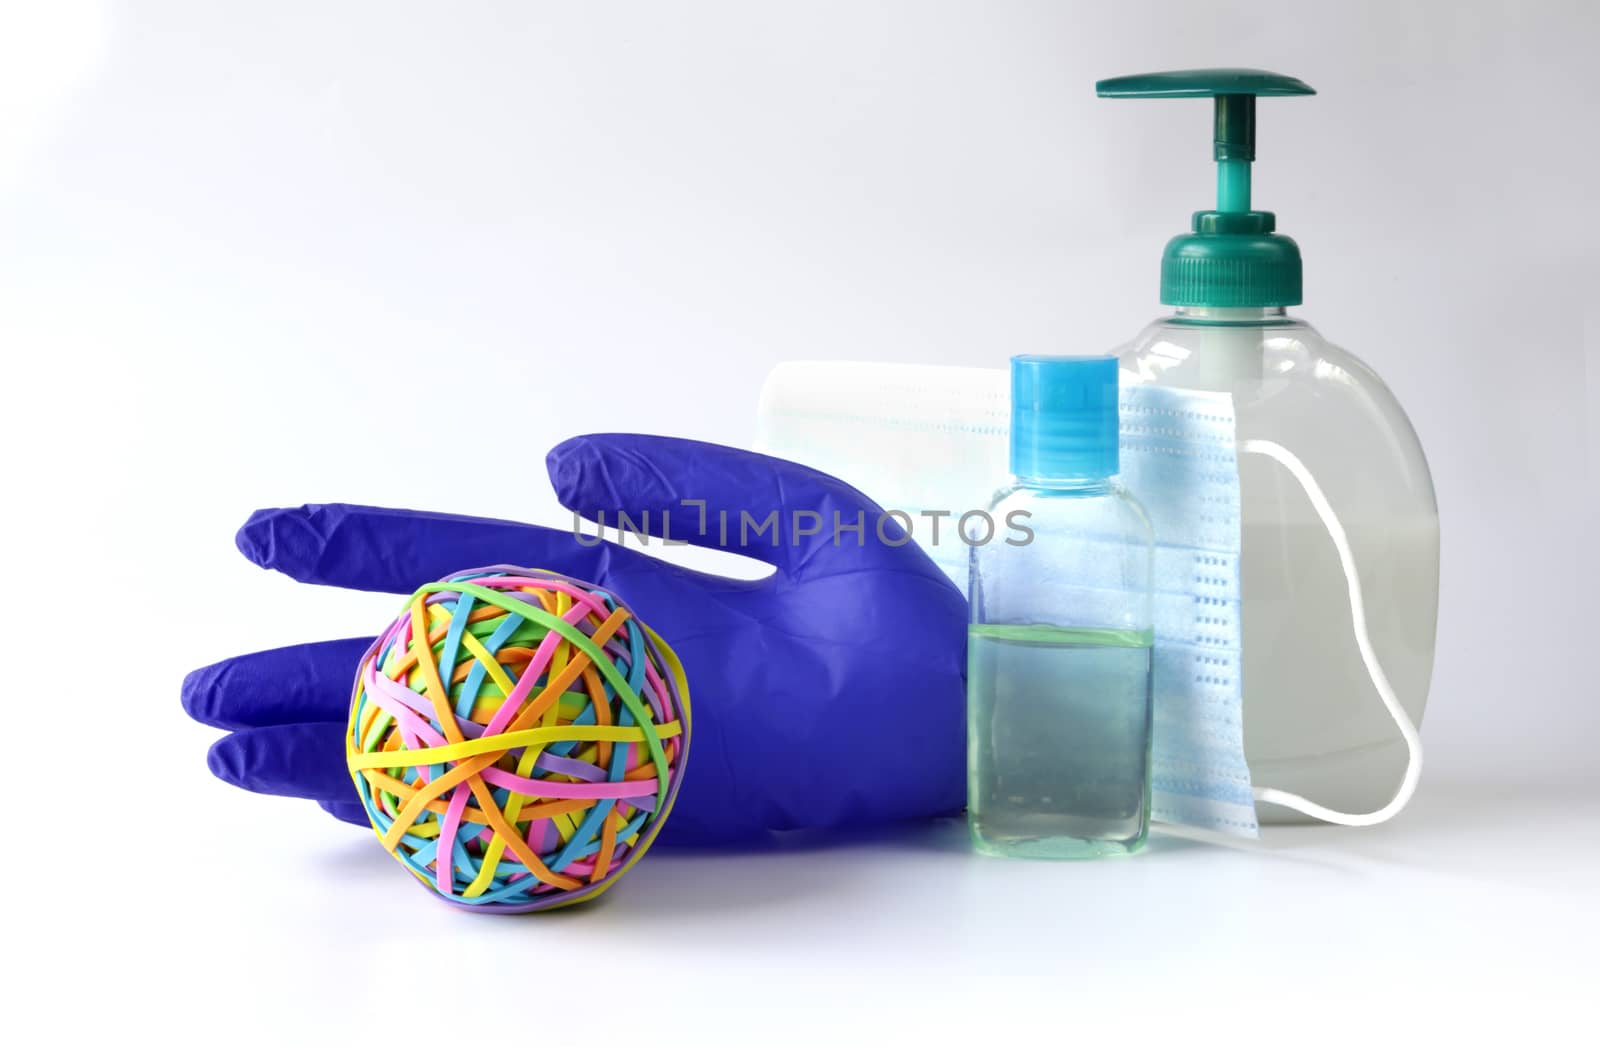 Protective face mask, soap, anticeptis, glove against virus on white background